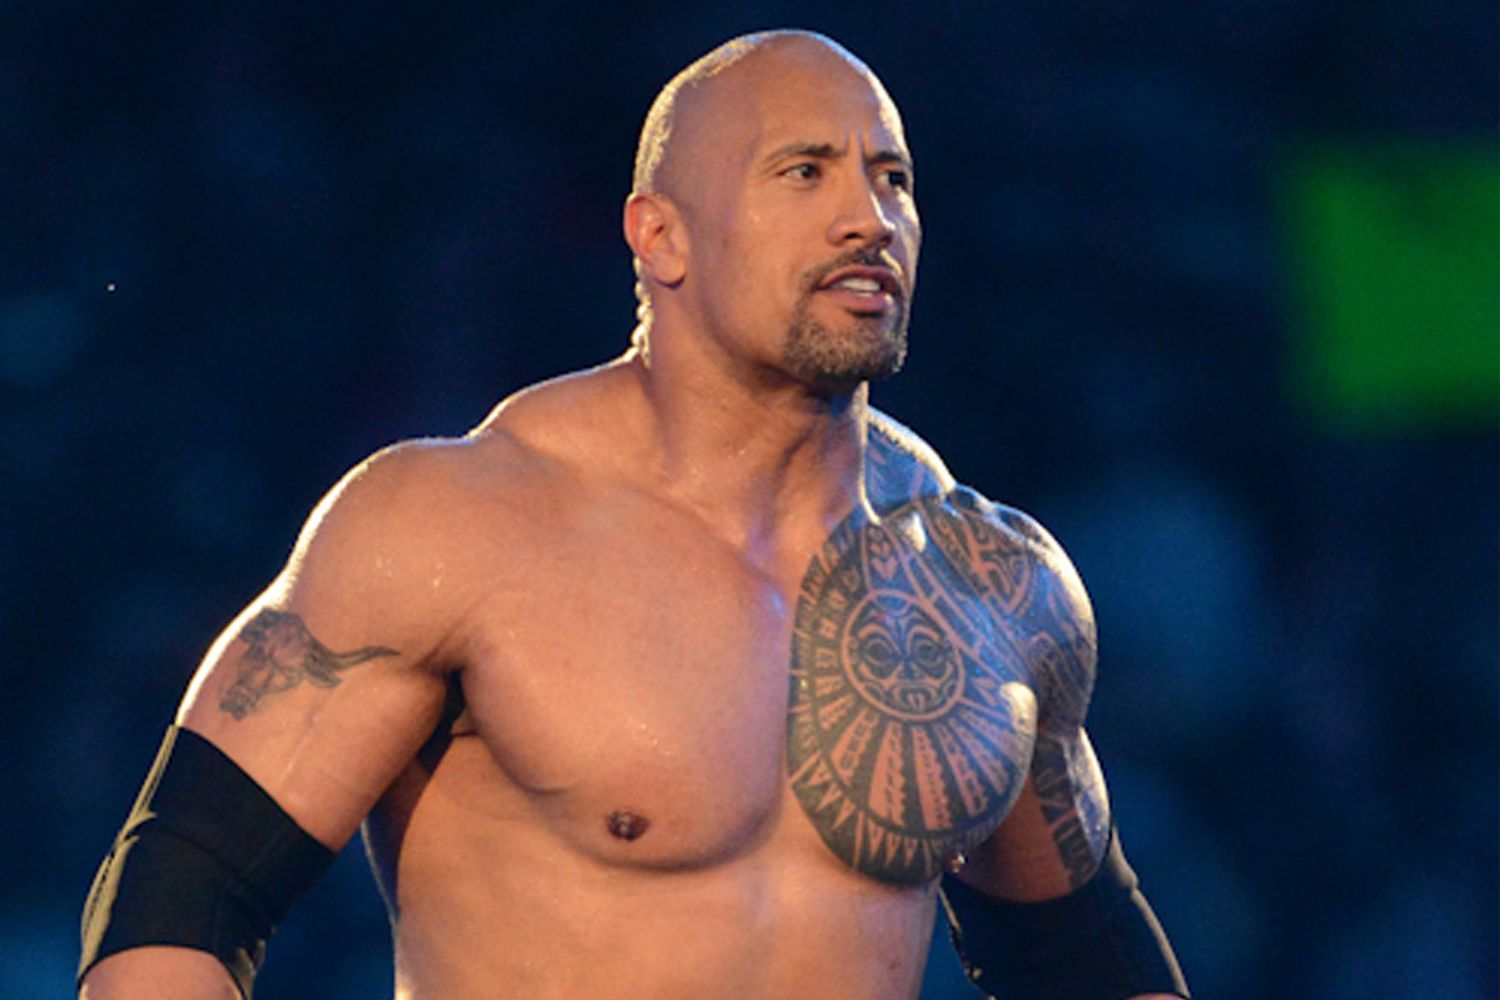 The Rock Shakes Up SmackDown: A WrestleMania Challenge That Has Fans Buzzing